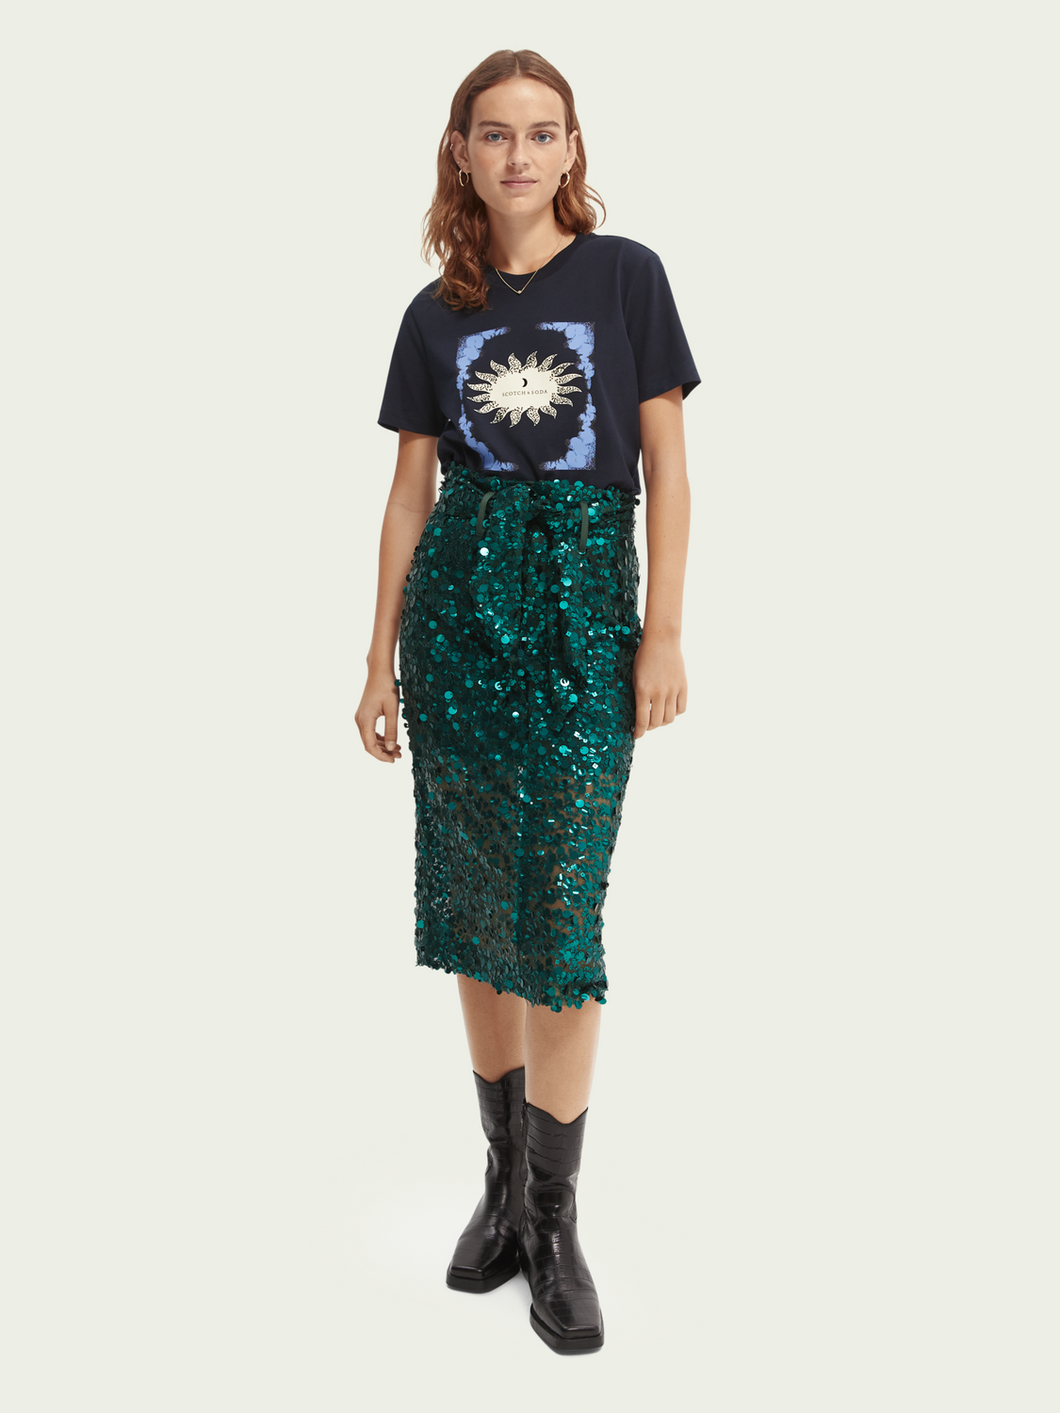 Scotch & Soda Sequin-Embellished Pencil Midi Skirt in Teal - FINAL SALE